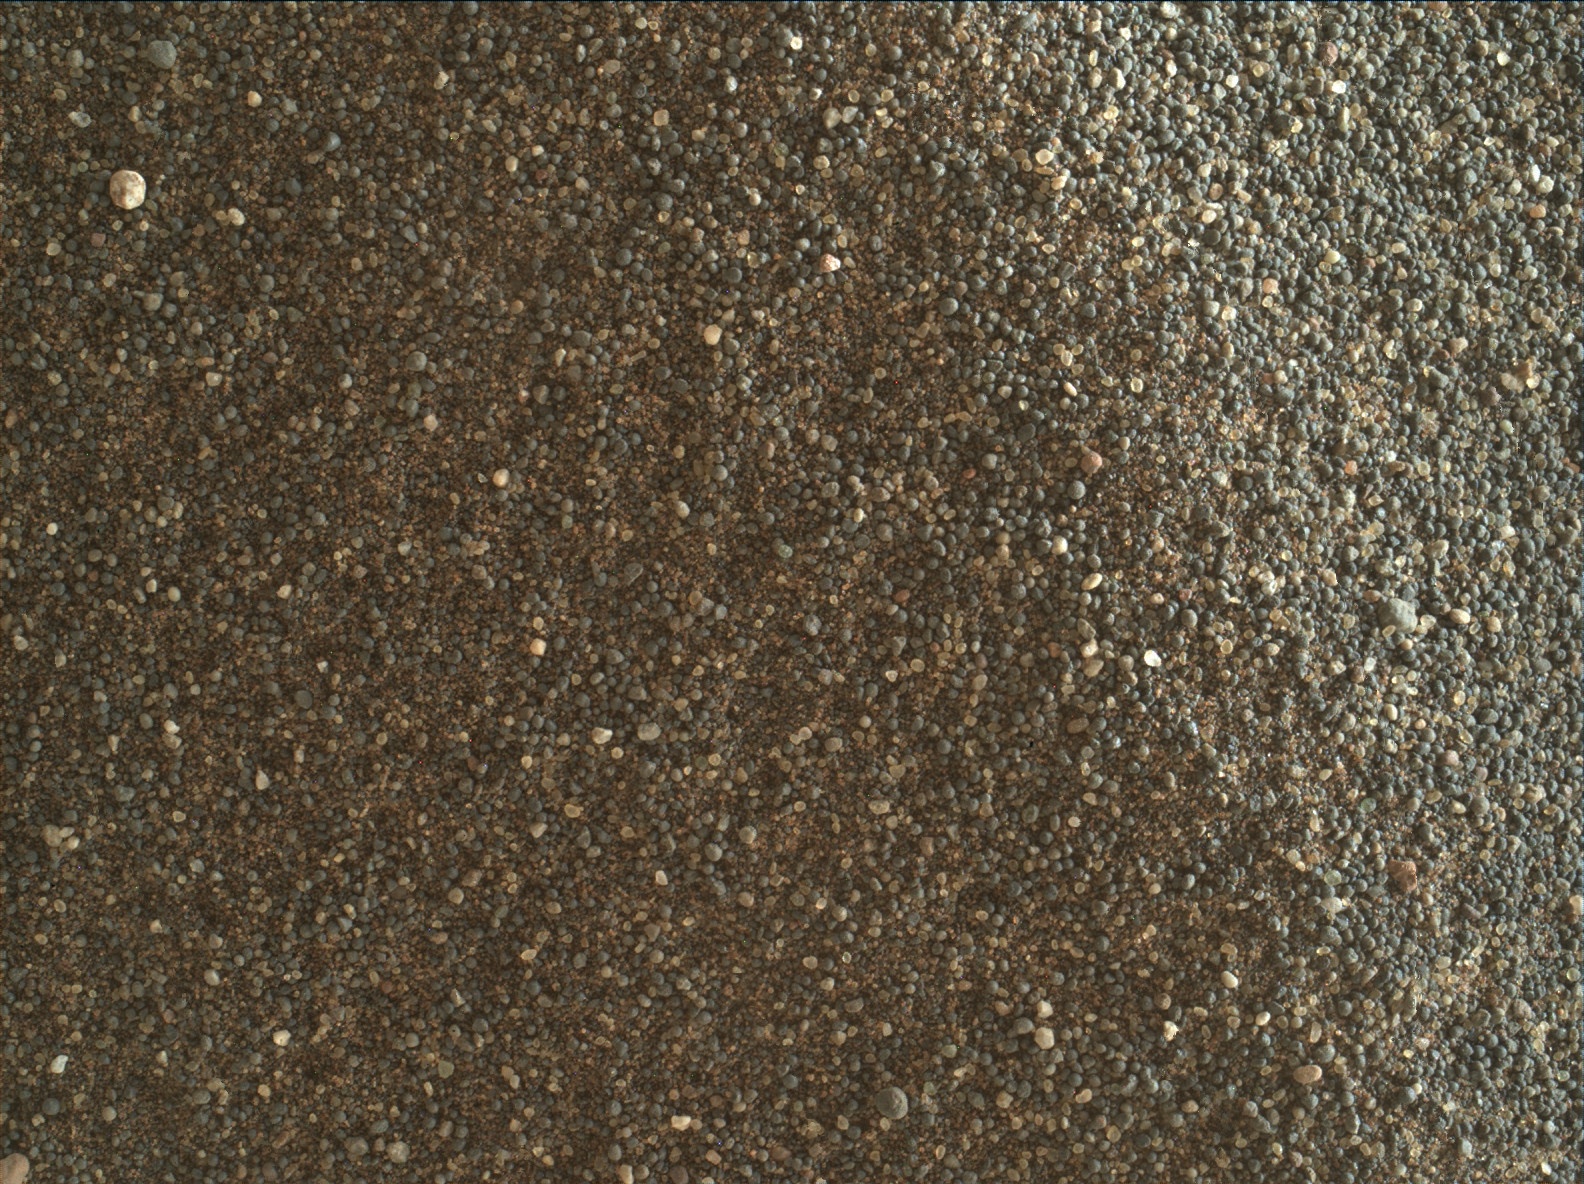 Nasa's Mars rover Curiosity acquired this image using its Mars Hand Lens Imager (MAHLI) on Sol 2412